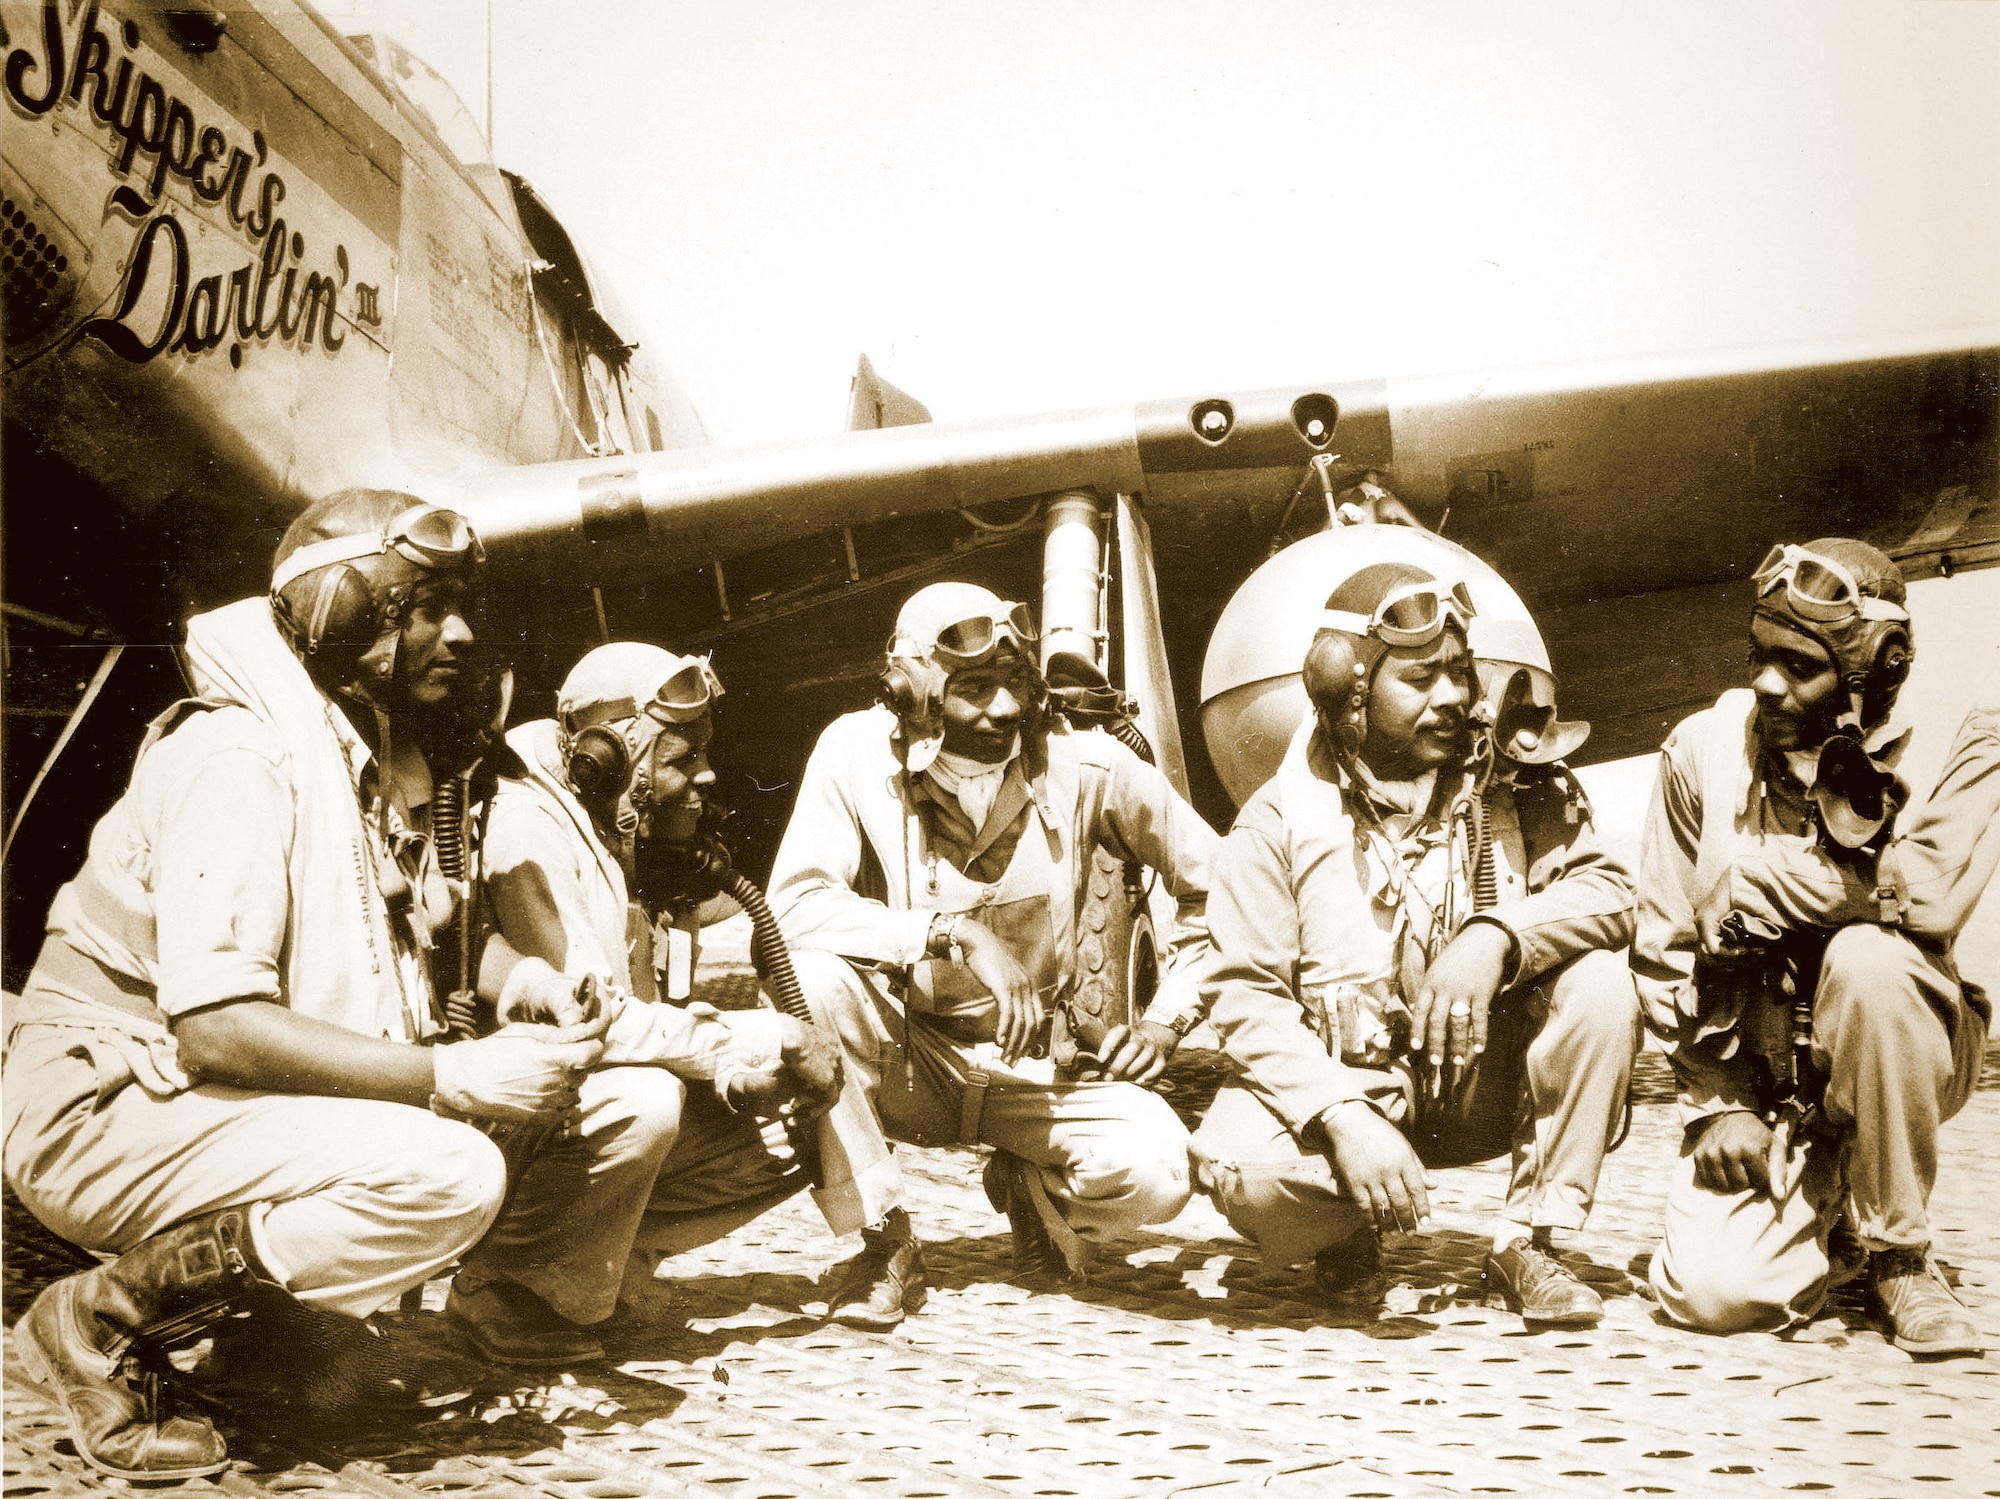 Pilots of the 332nd Fighter Group, "Tuskegee Airmen," the elite, all-African American unit, pose at Ramitelli, Italy: (from left to right) Lt. Dempsey Morgan, Lt. Carroll Woods, Lt. Robert Nelson Jr., Capt. Andrew D. Turner, and Lt. Clarence Lester. 